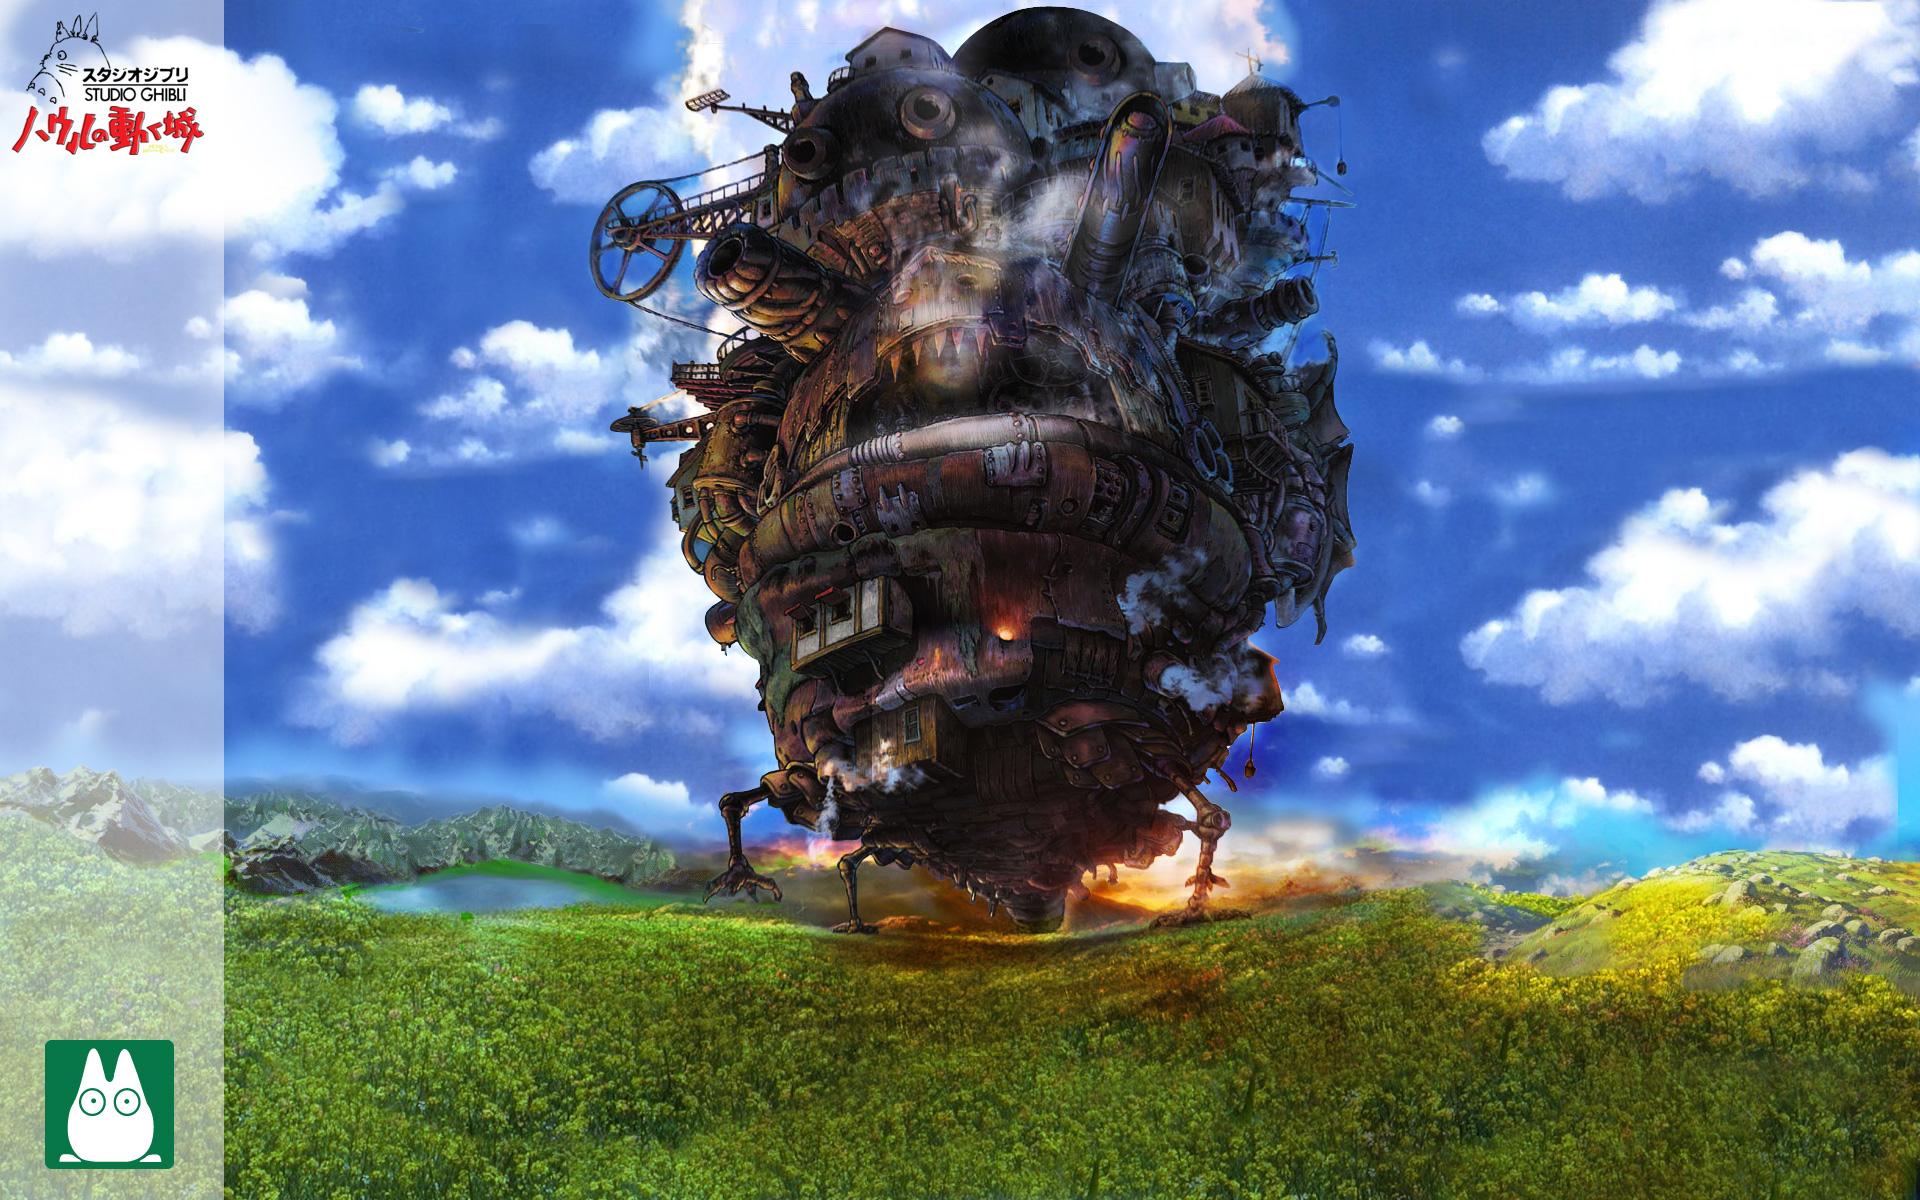 Howls Moving Castle by Studio Ghibli